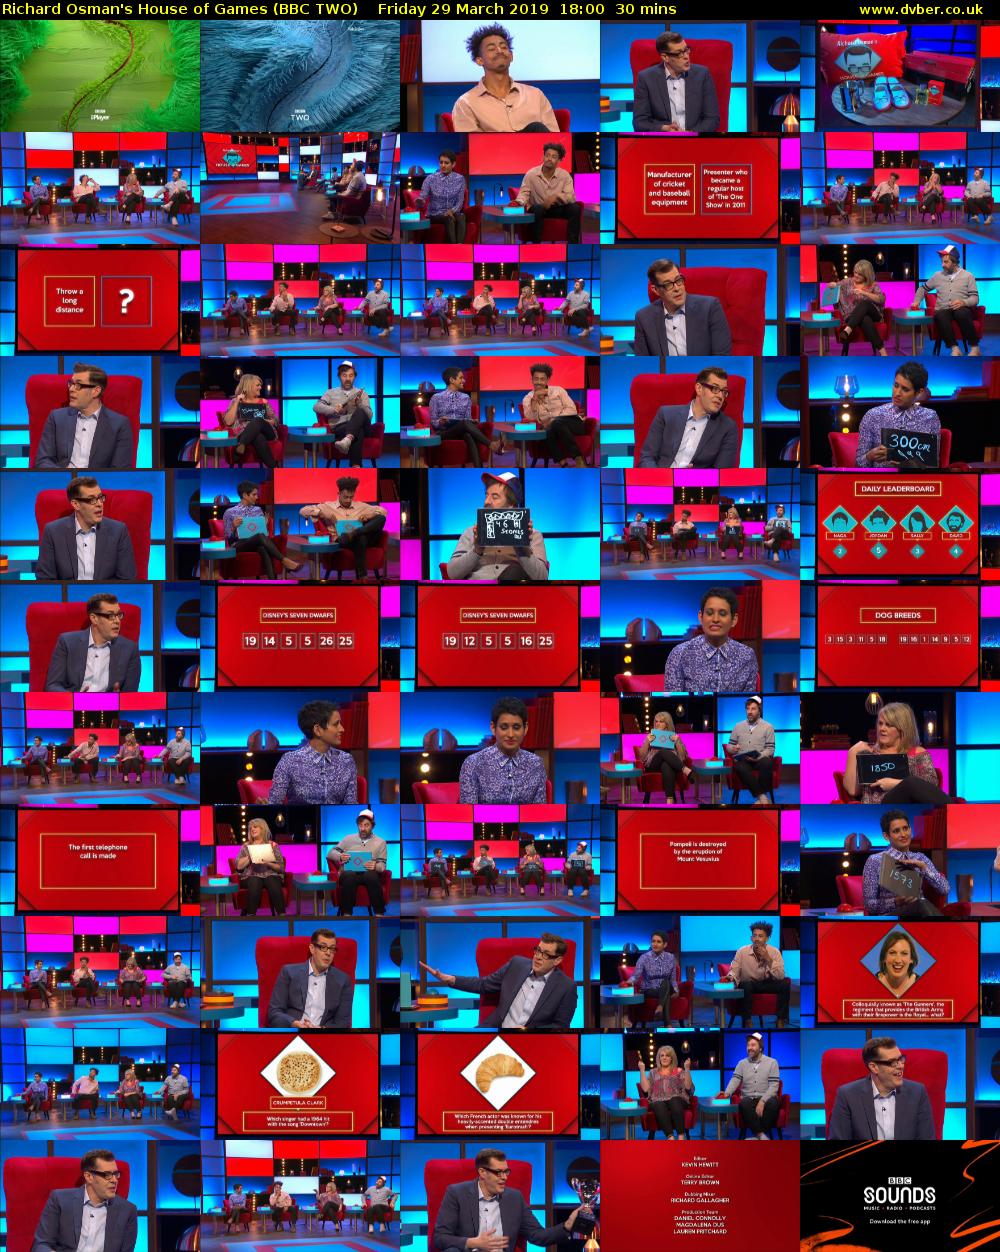 Richard Osman's House of Games (BBC TWO) Friday 29 March 2019 18:00 - 18:30